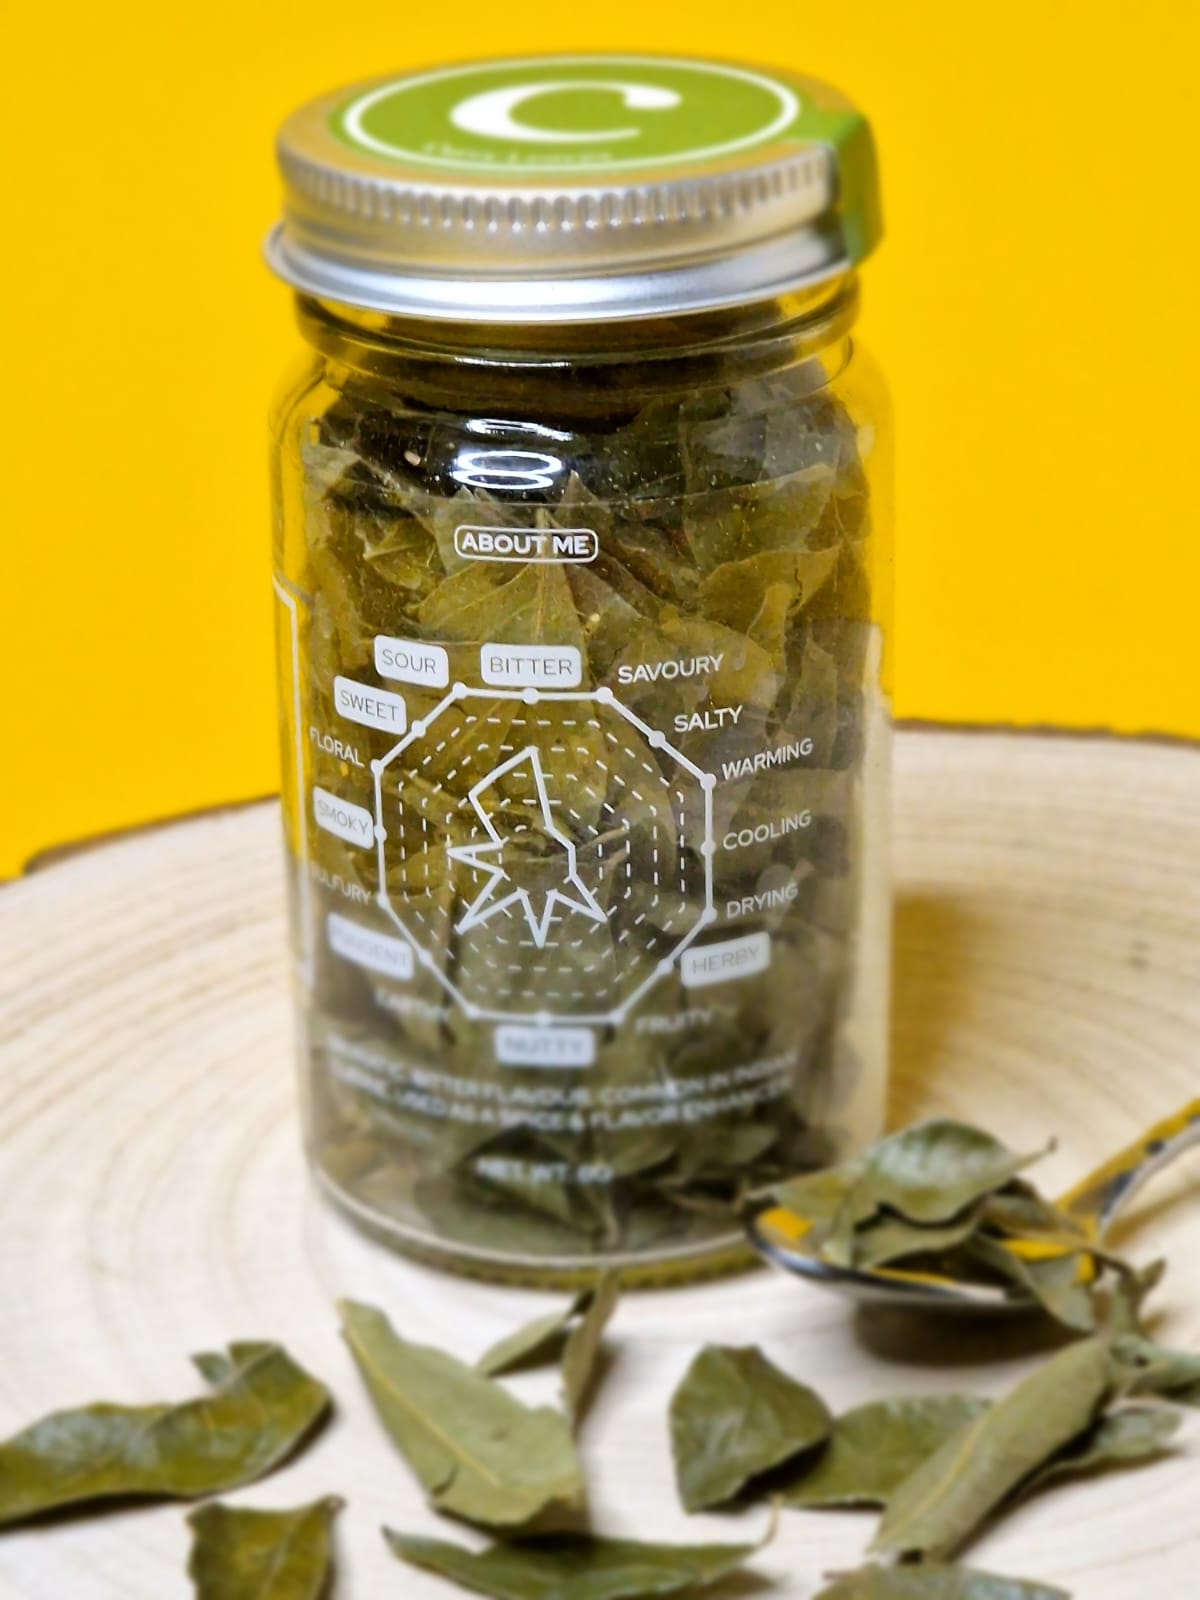 Curry Leaves (Organic) - 6 grams